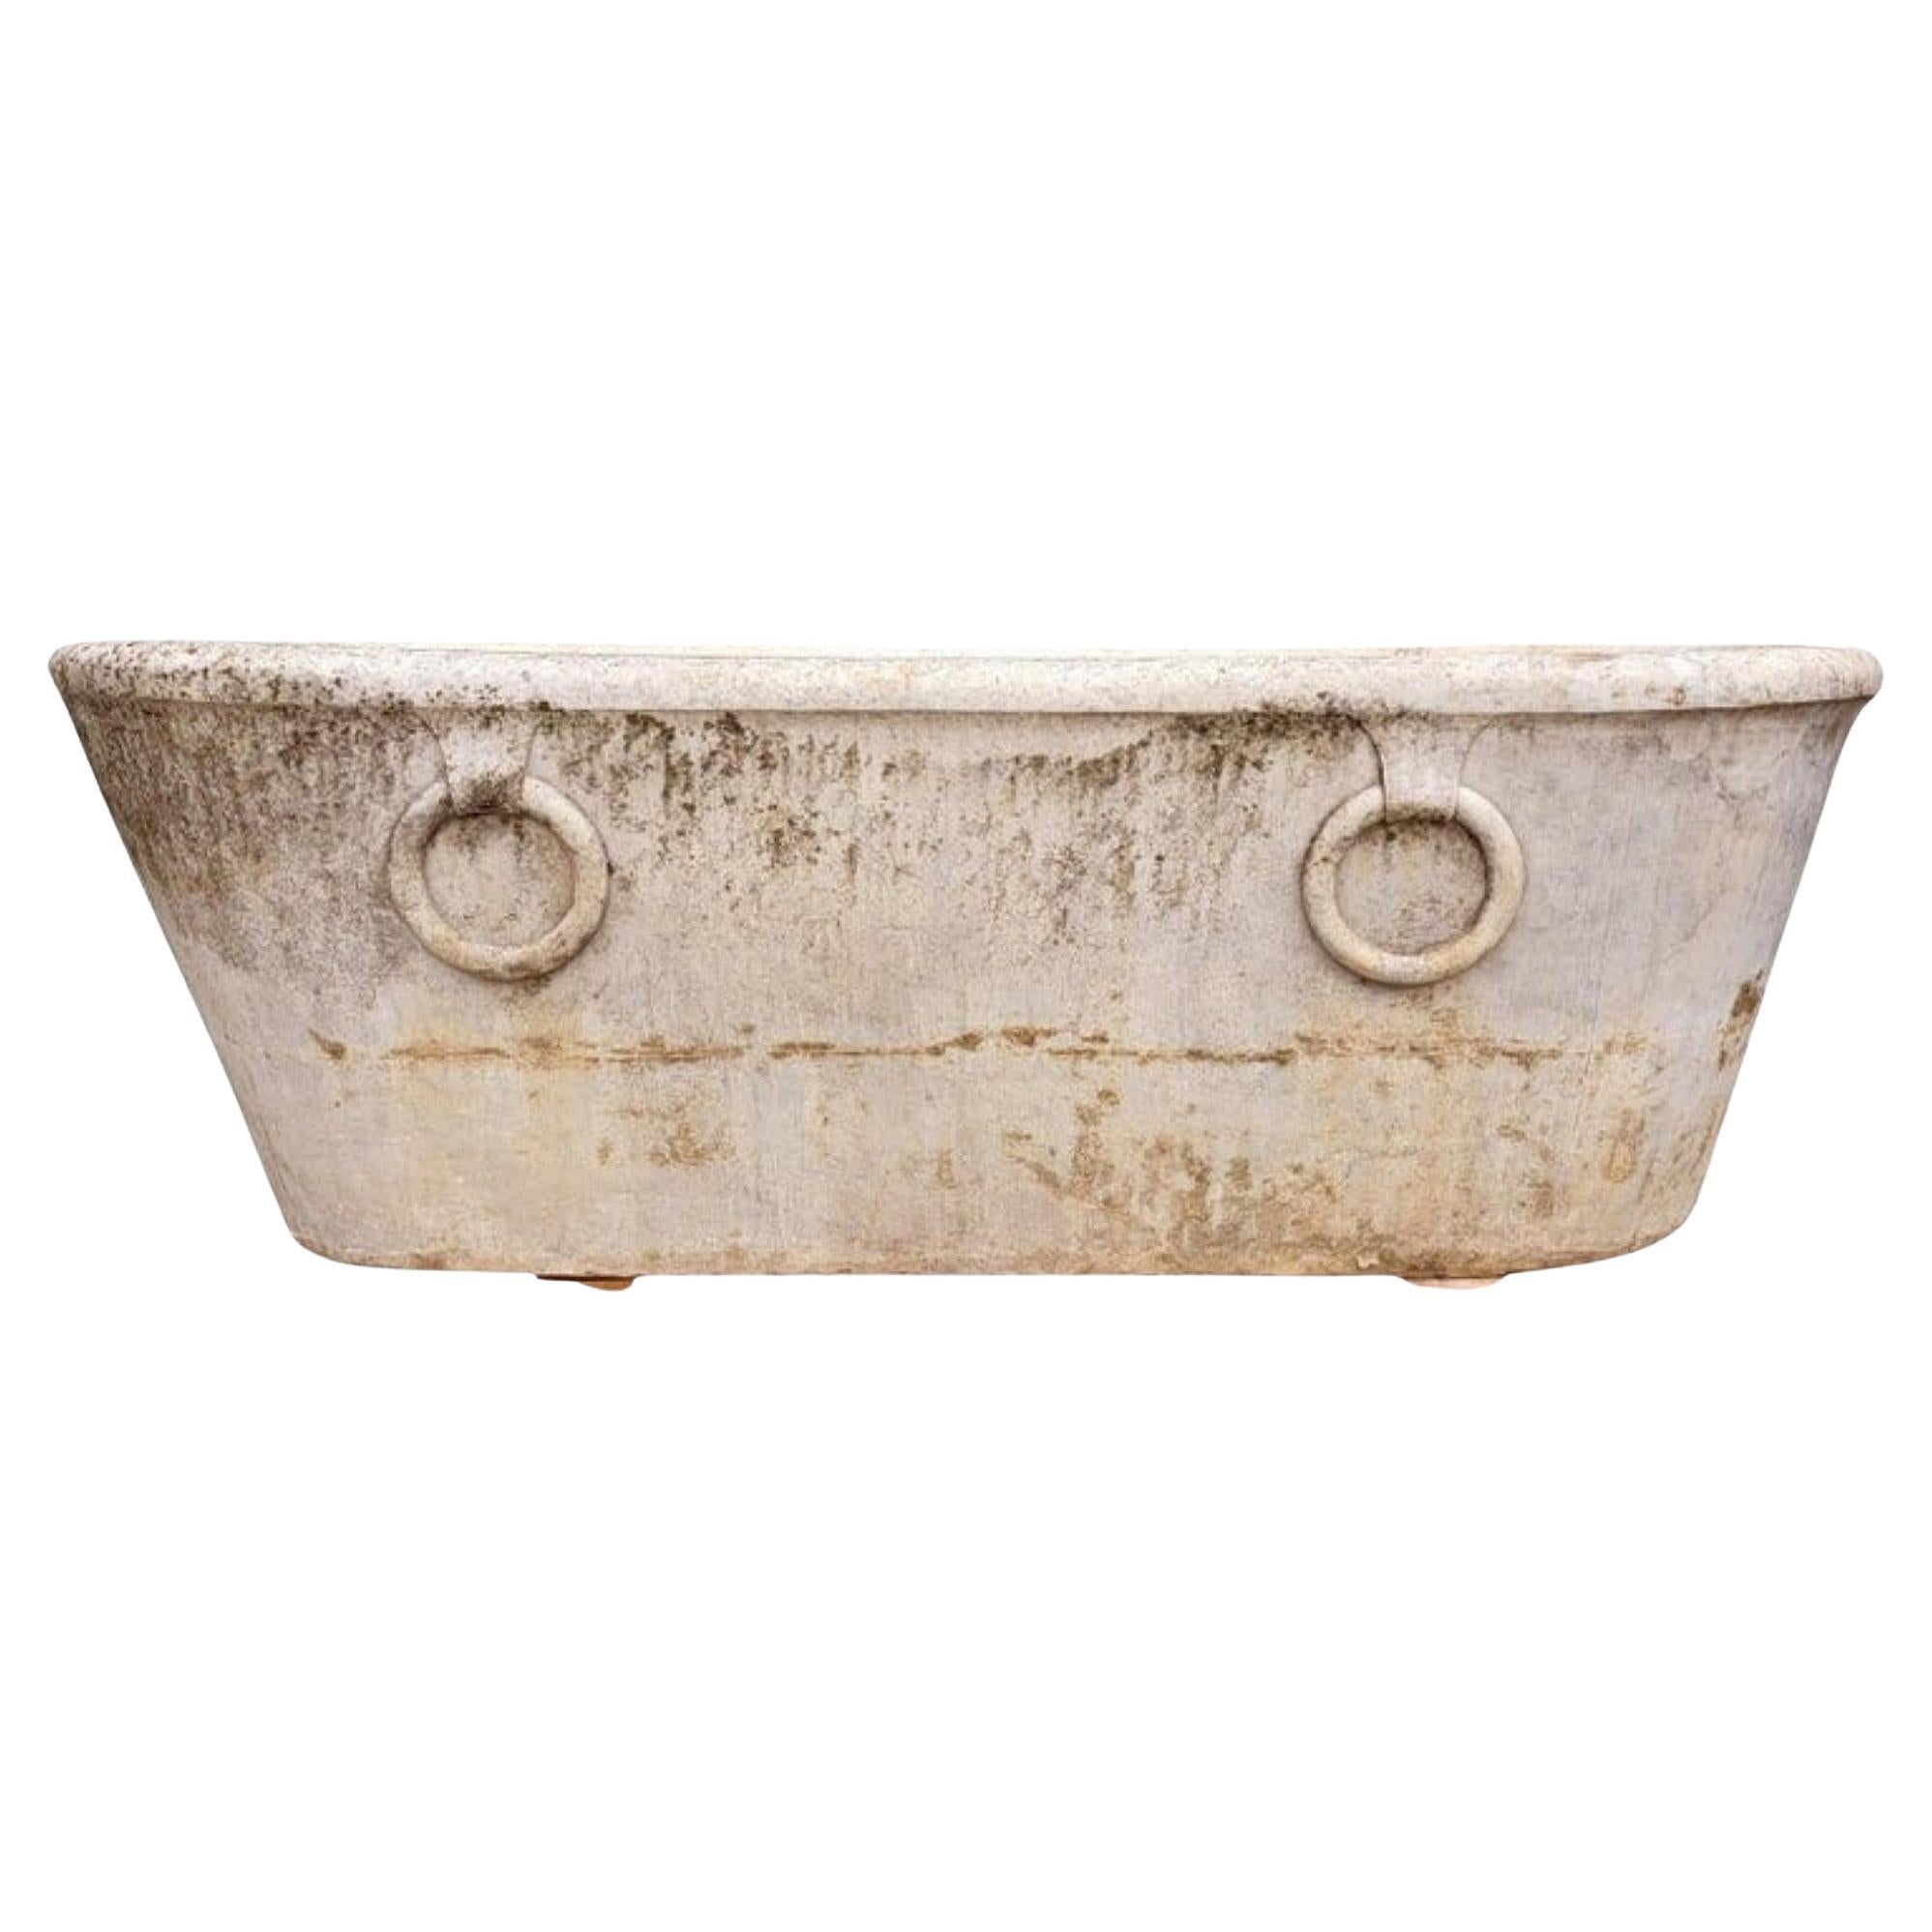 Amazing Antique Bathtub in Carrara White Marble with Rings 18th Century